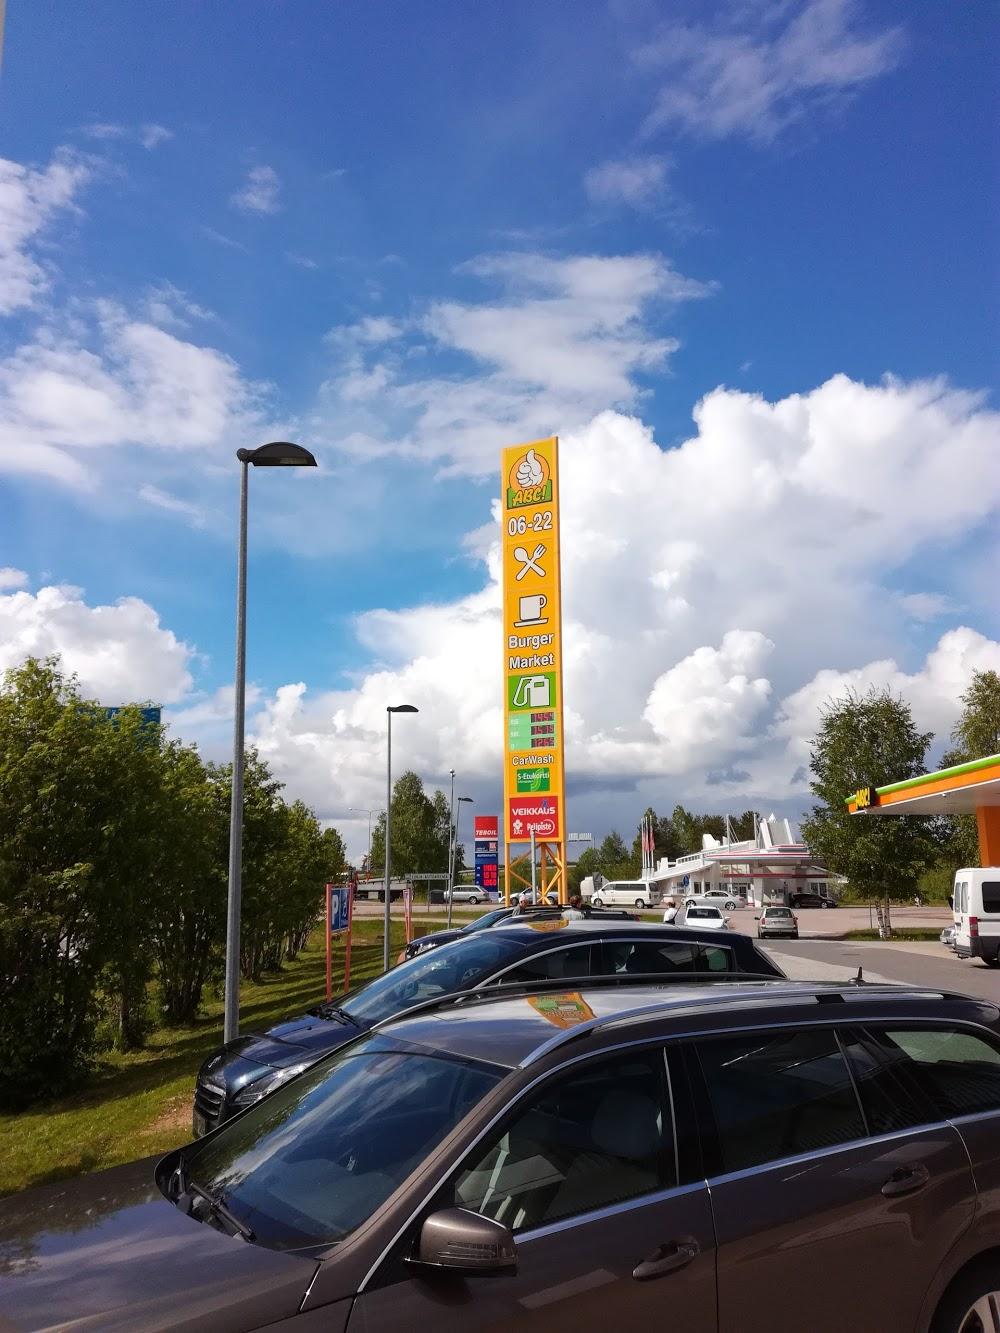 Cover image of this place ABC- Gas Station Kemijärvi